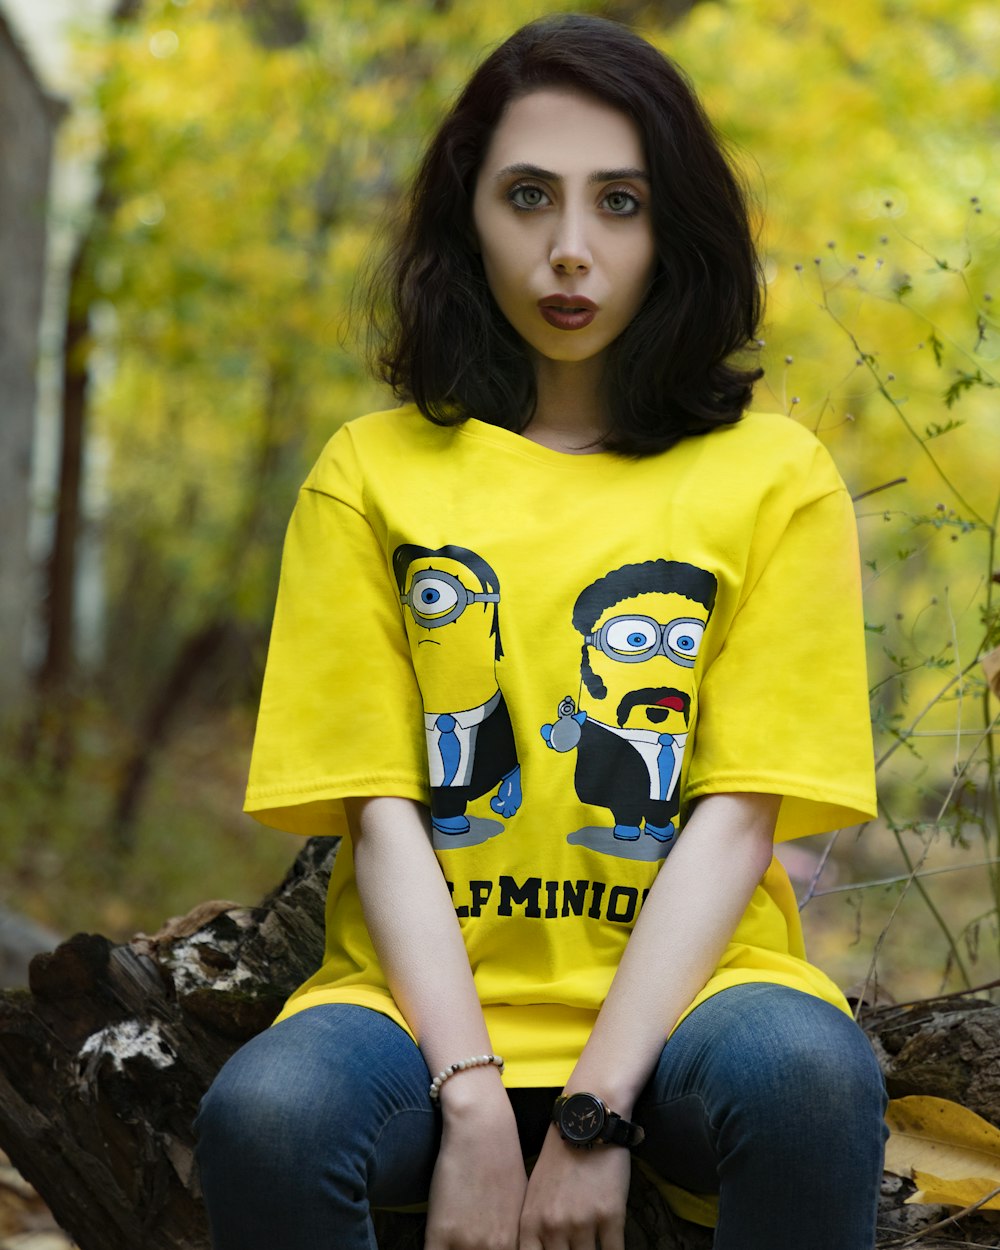 girl in yellow crew neck t-shirt and blue denim jeans sitting on brown rock during